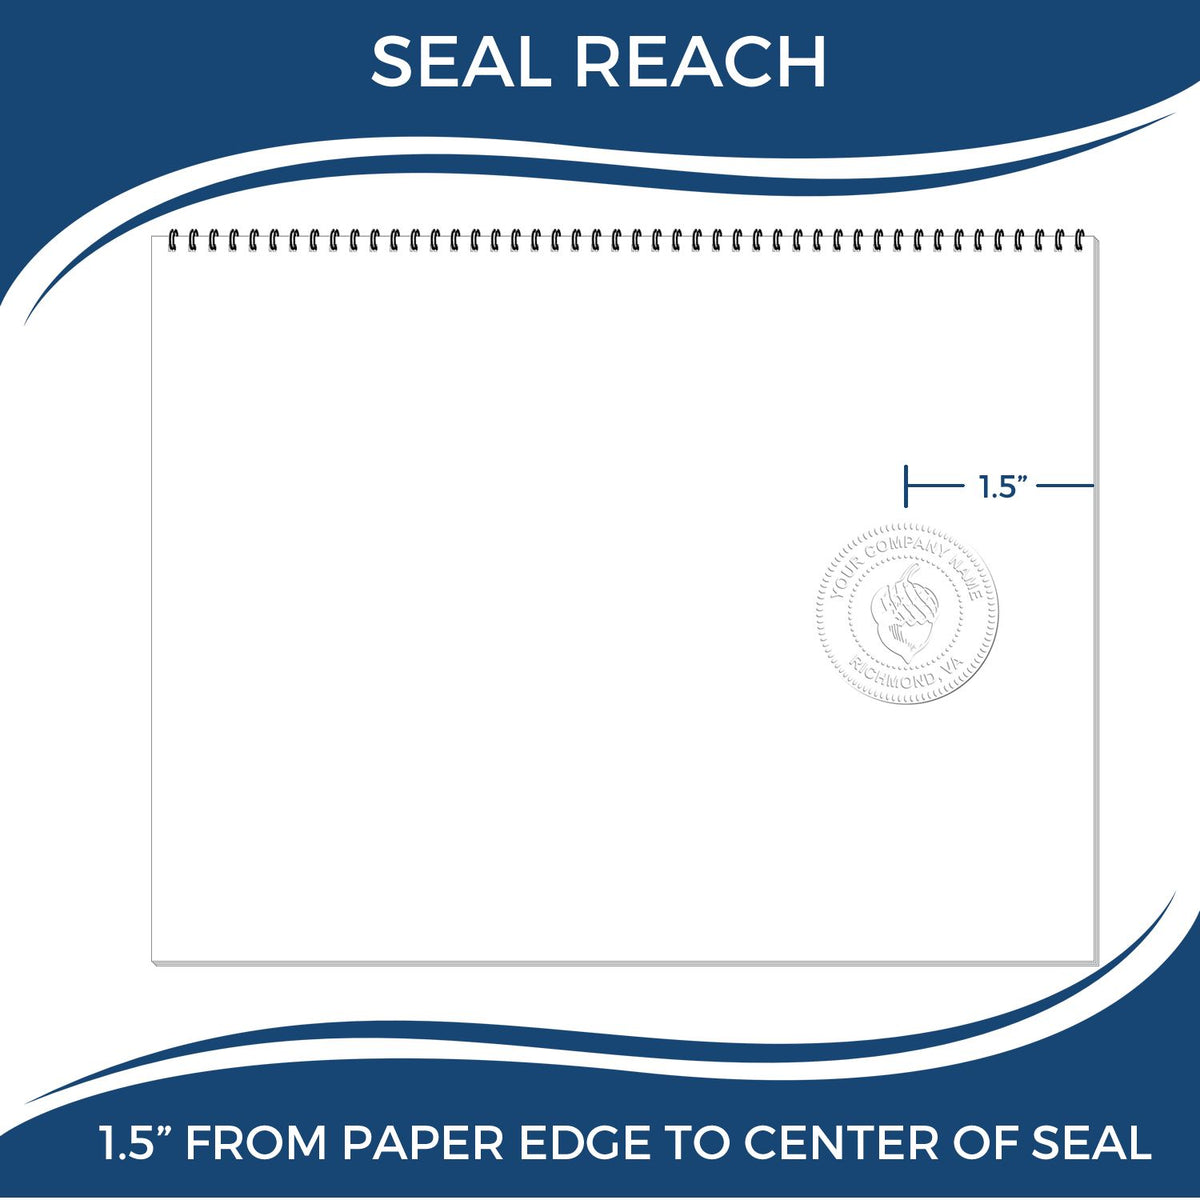 An infographic showing the seal reach which is represented by a ruler and a miniature seal image of the Gift Guam Engineer Seal